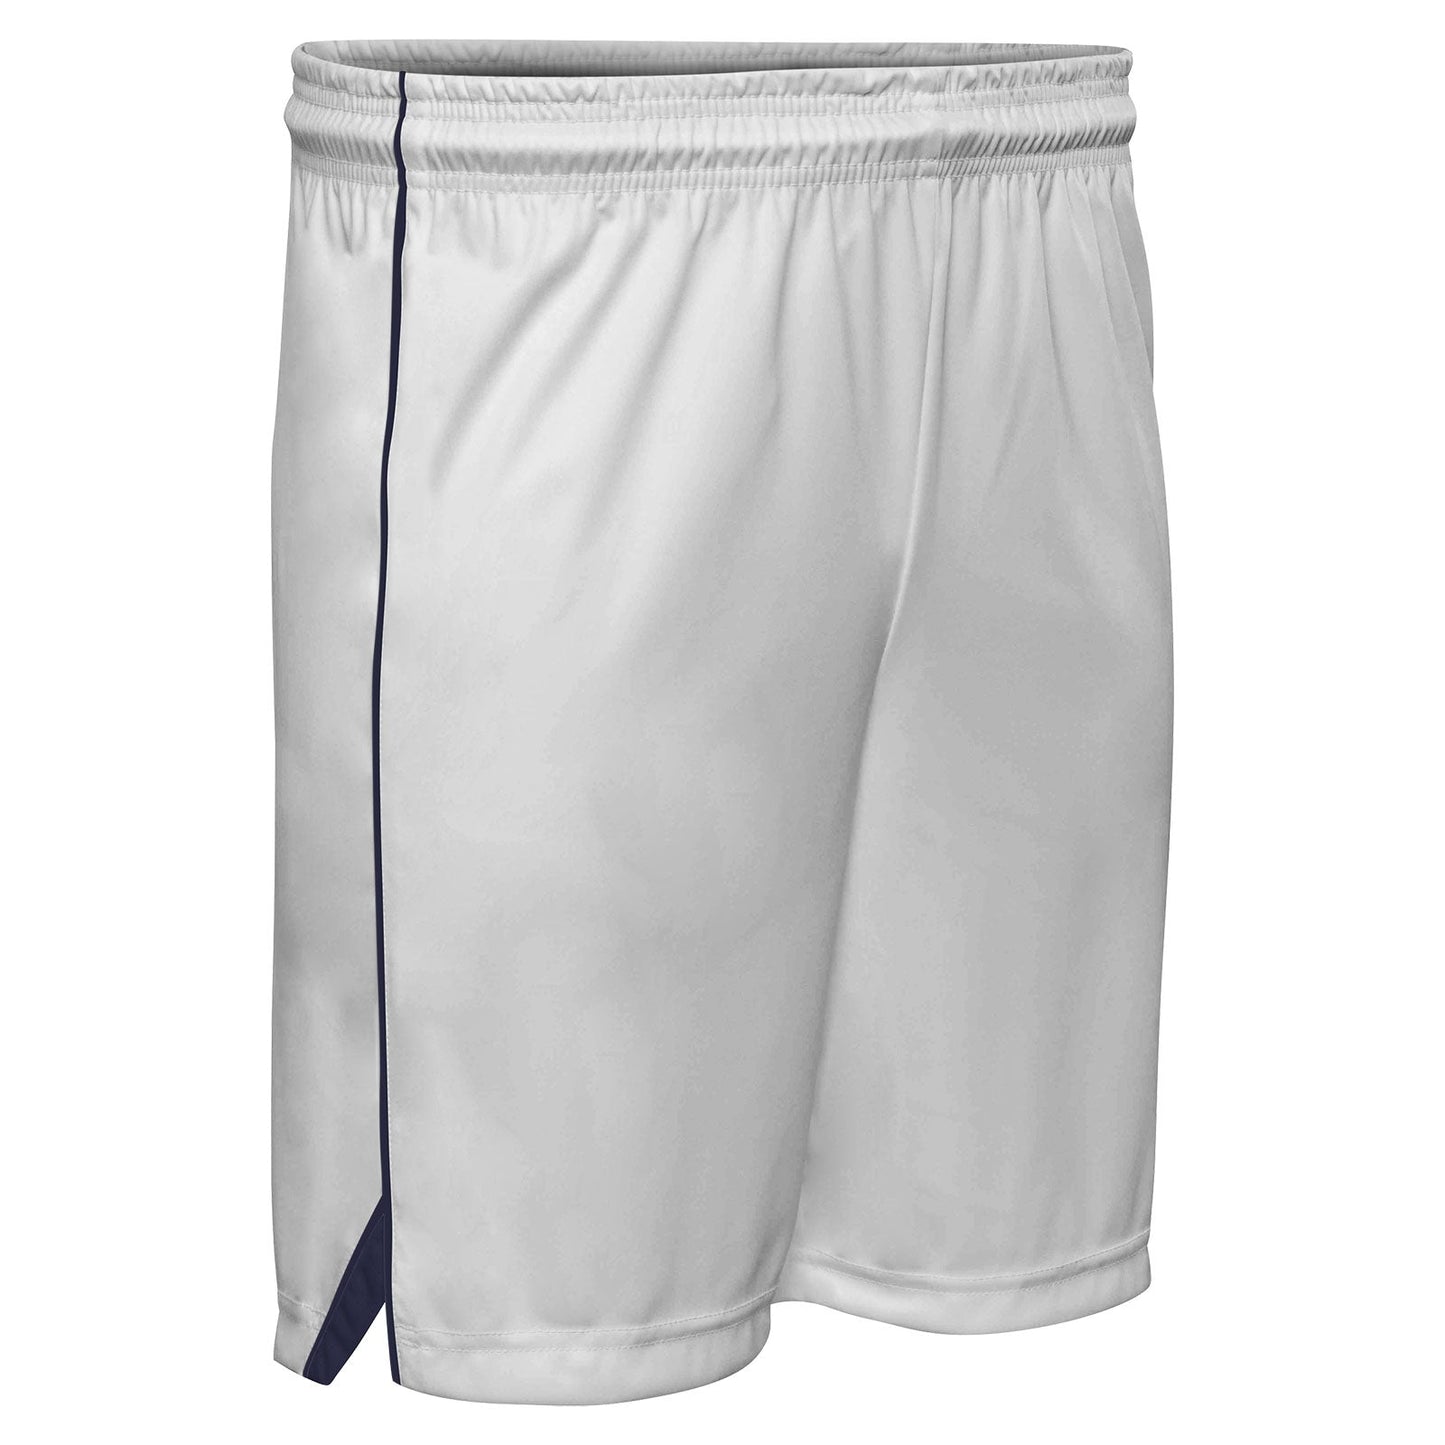 Elite Moisture Wicking Girls Basketball Short With Side Piping, Youth